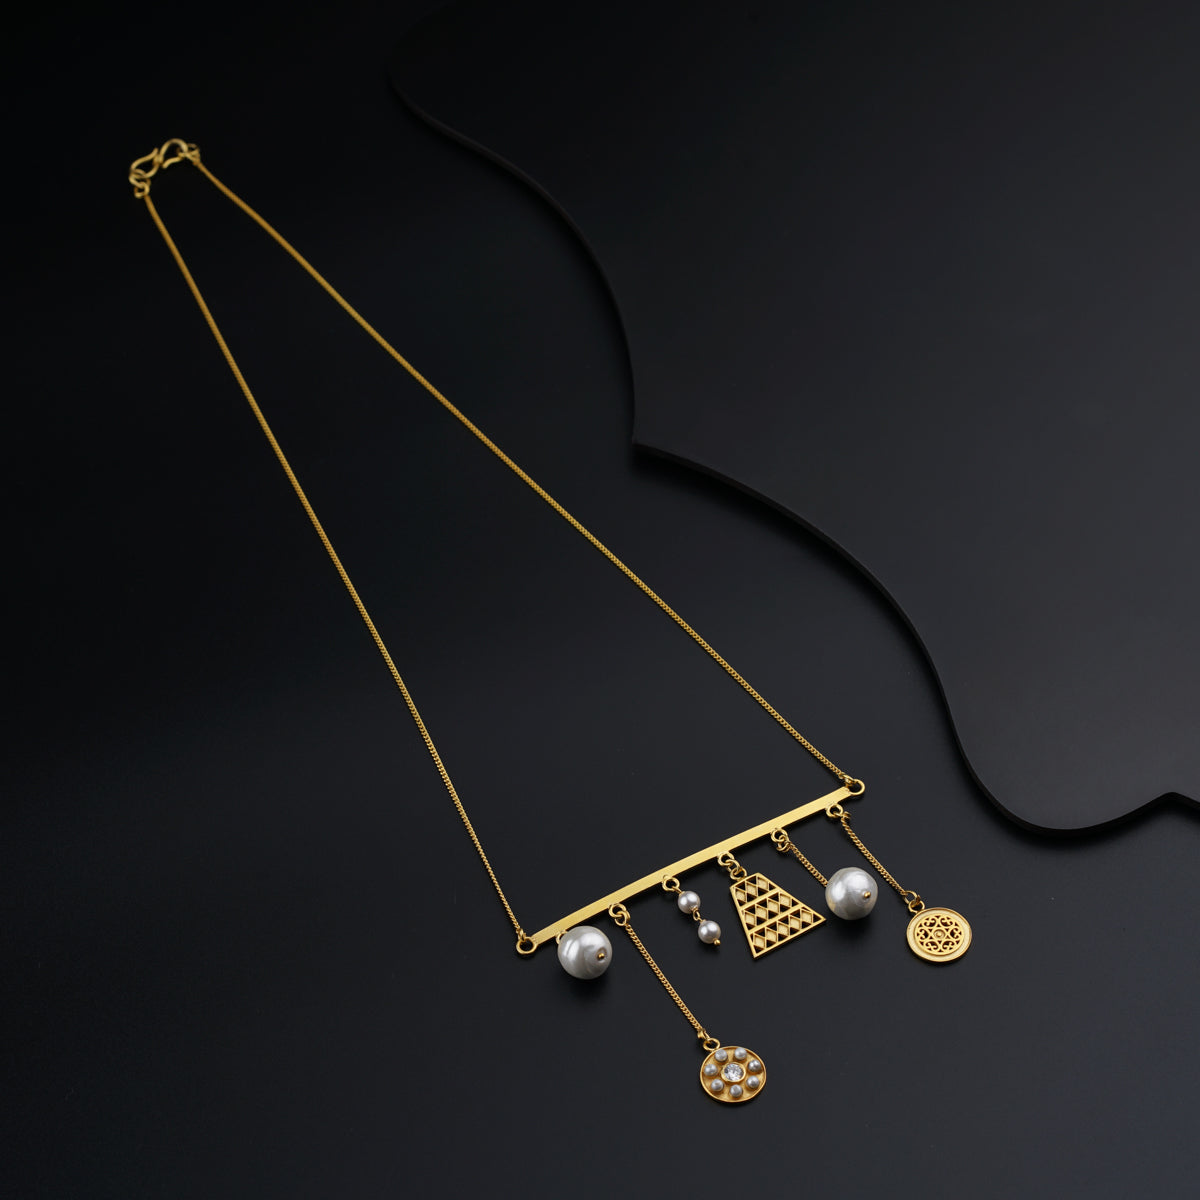 a gold necklace with pearls and charms on a black background